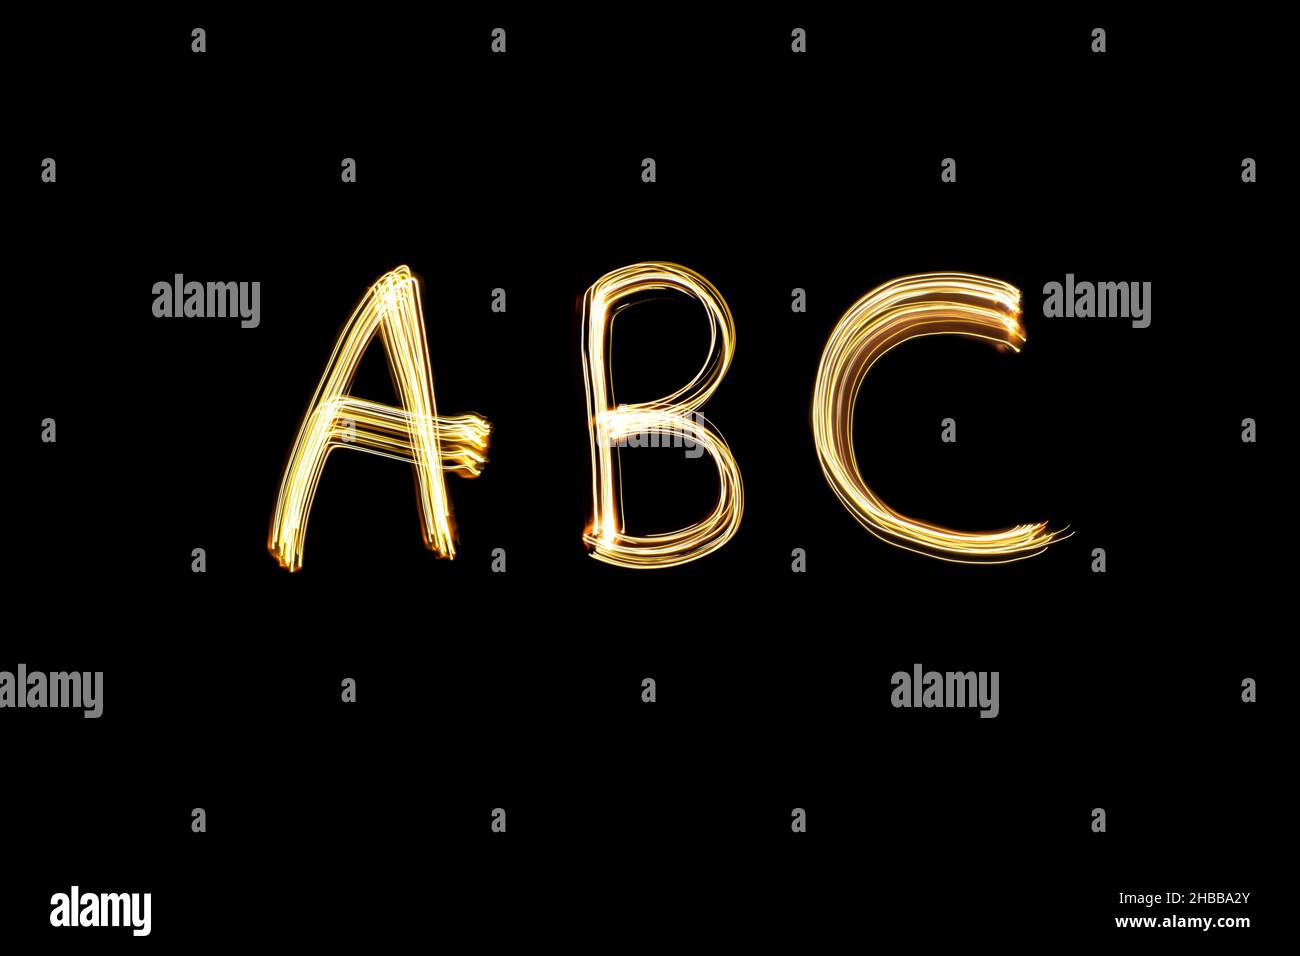 Neon ABC letters, light painting yellow alphabet against black background. Long exposure photography. Stock Photo